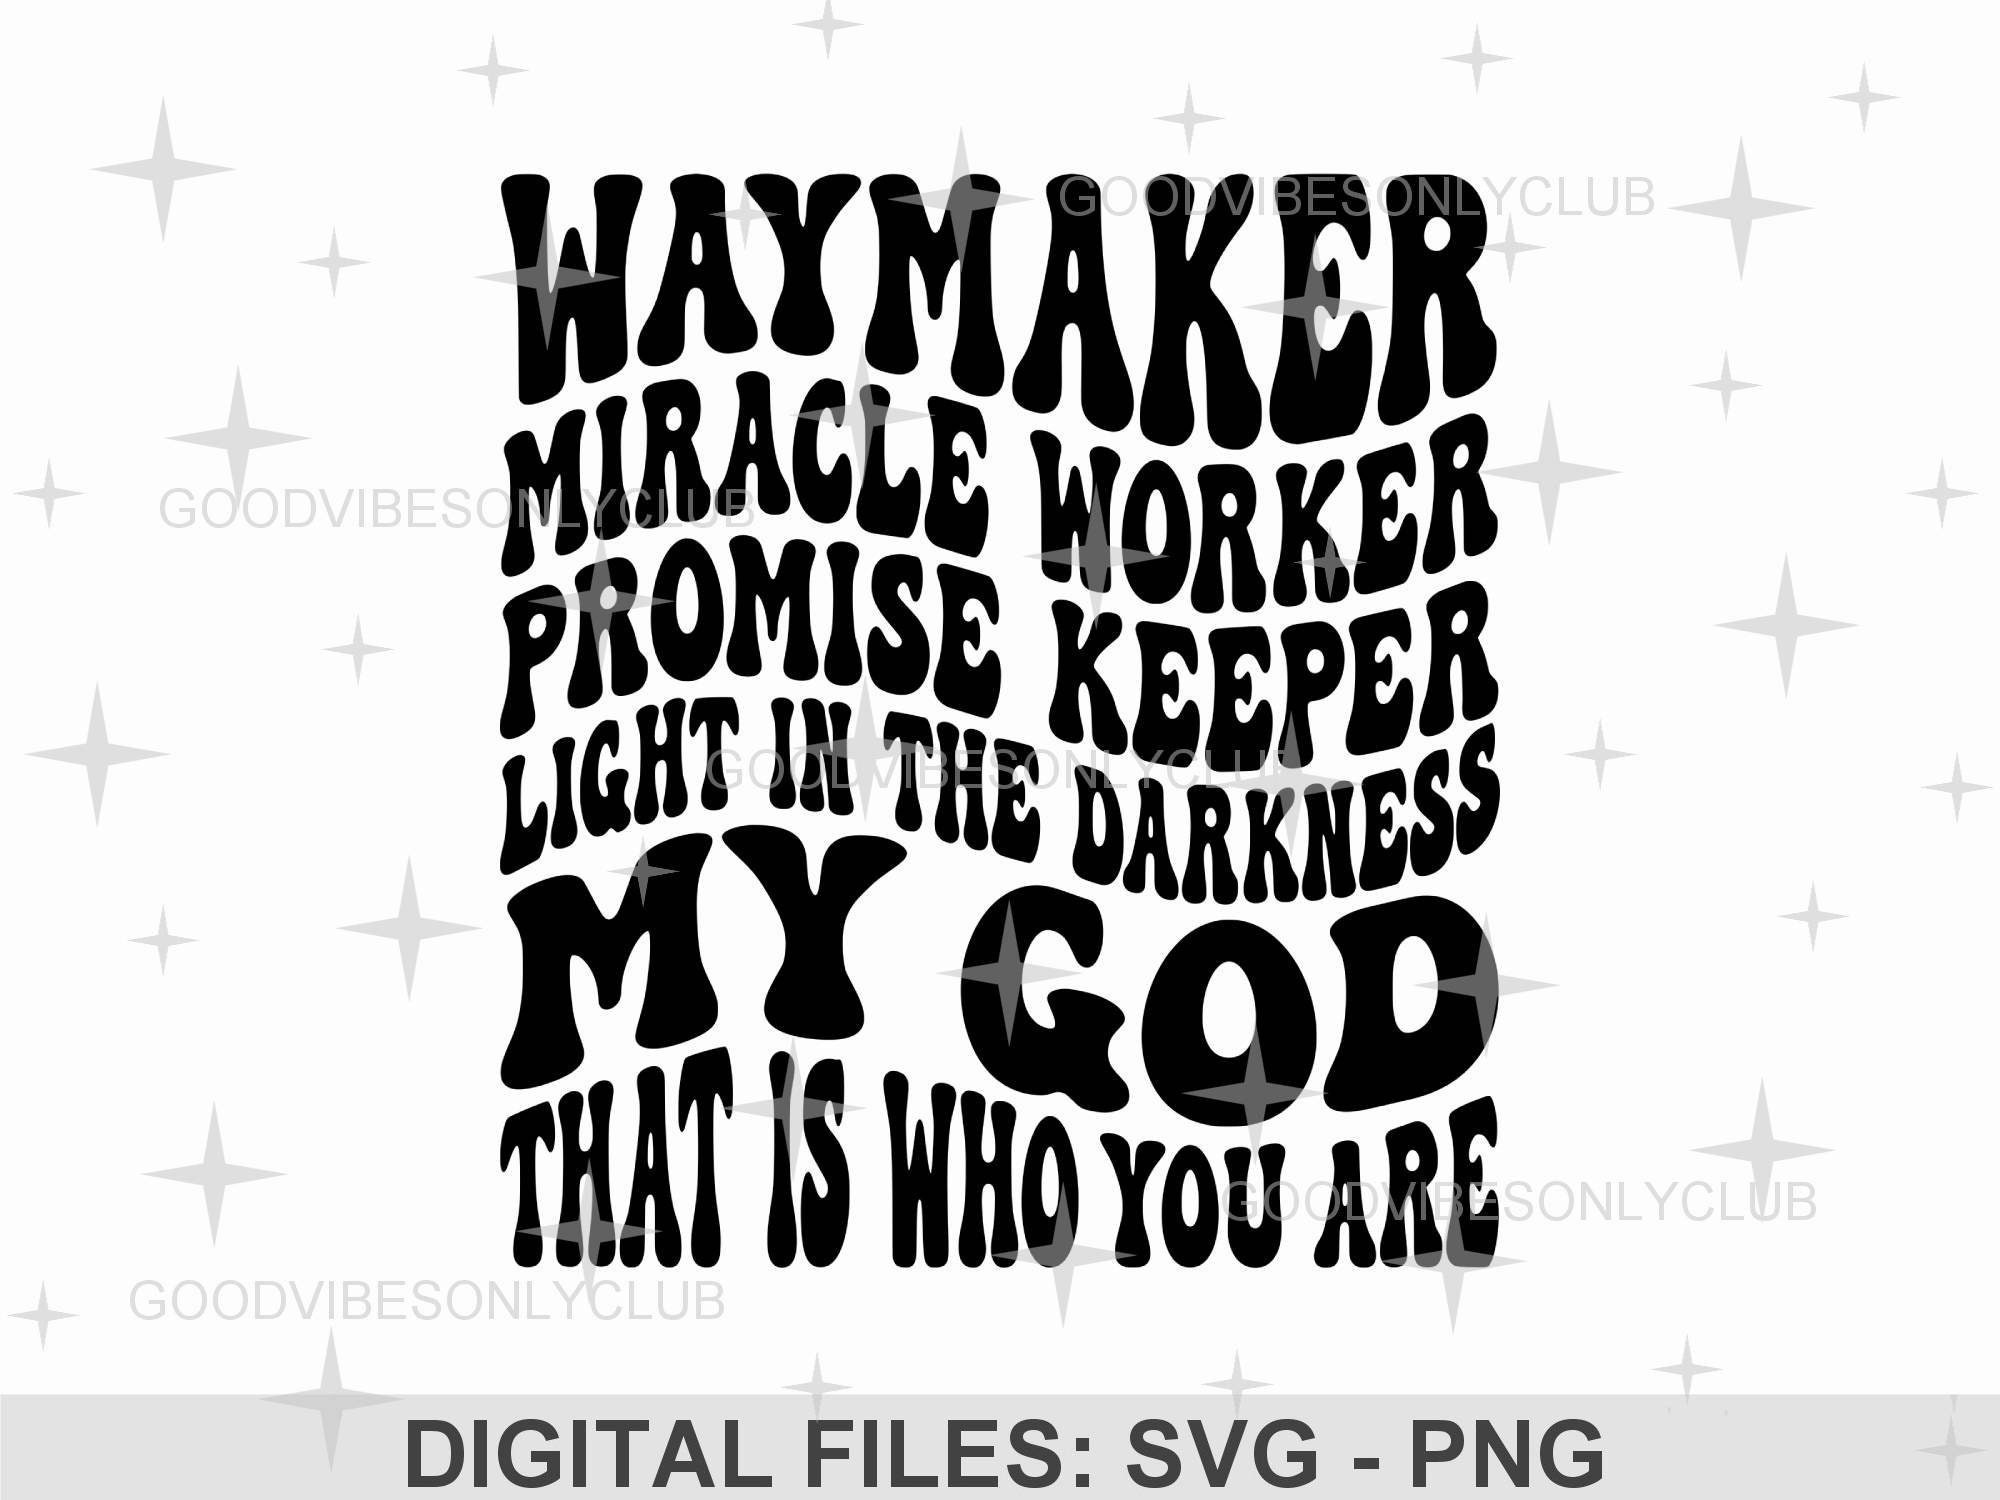 Way Maker, Miracle Worker, Promise Keeper, My God, Sunflower Design for  Shirts or Crafts, Digital Download for Sublimation, PNG file